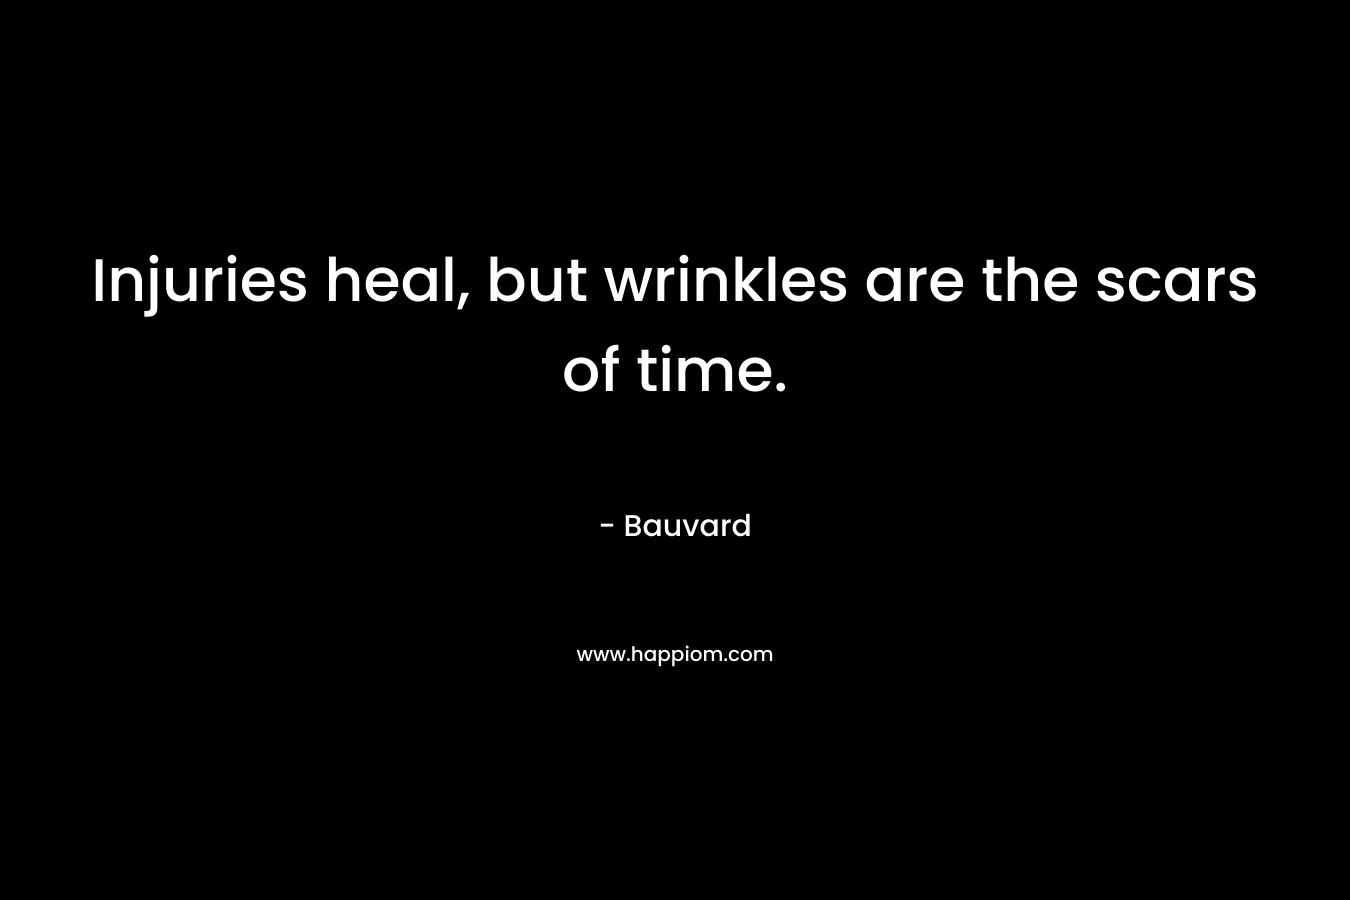 Injuries heal, but wrinkles are the scars of time.